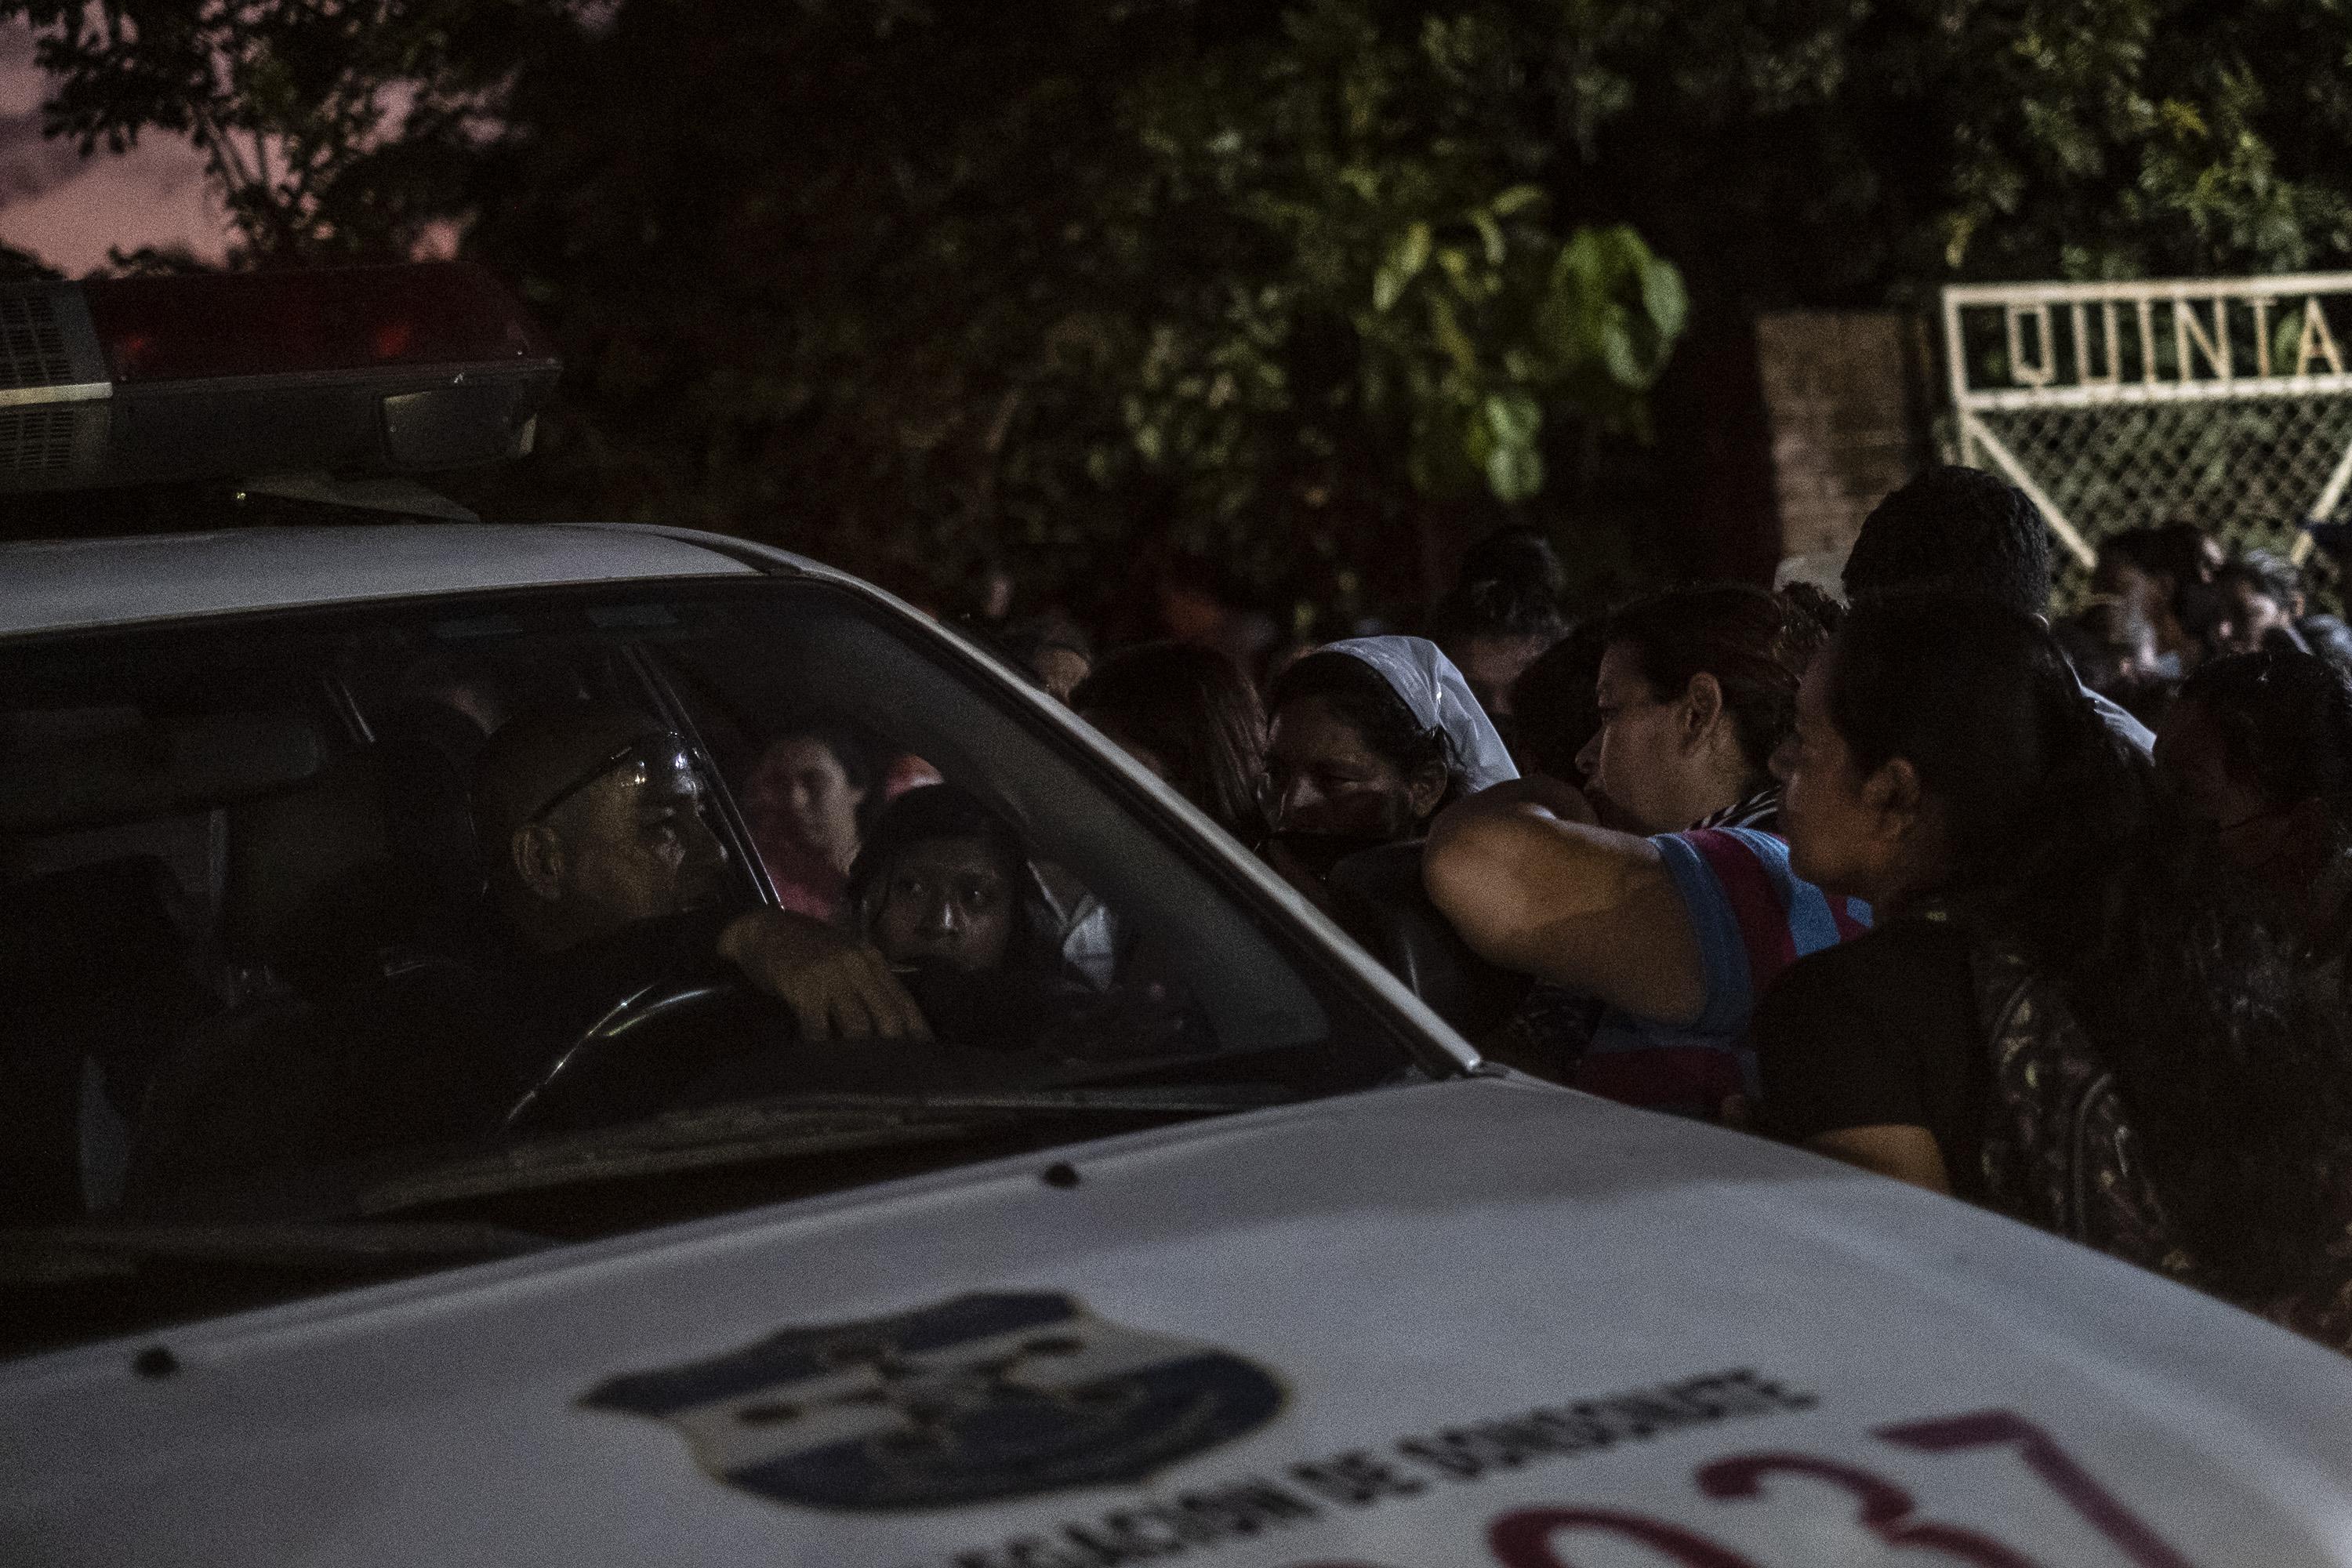 “Rumors run wild” on the street leading to Izalco Prison, says one police officer. “Despite how much you tell these women not to come, they will always find their way here,” he added as a group of women crowded around a patrol car at night on April 28 when they learned that none of their family members would be freed that day. “You try to understand their perspective, because of course a mother or a wife would do it for a man, but we can’t do anything to help them here.” Photo: Carlos Barrera/El Faro